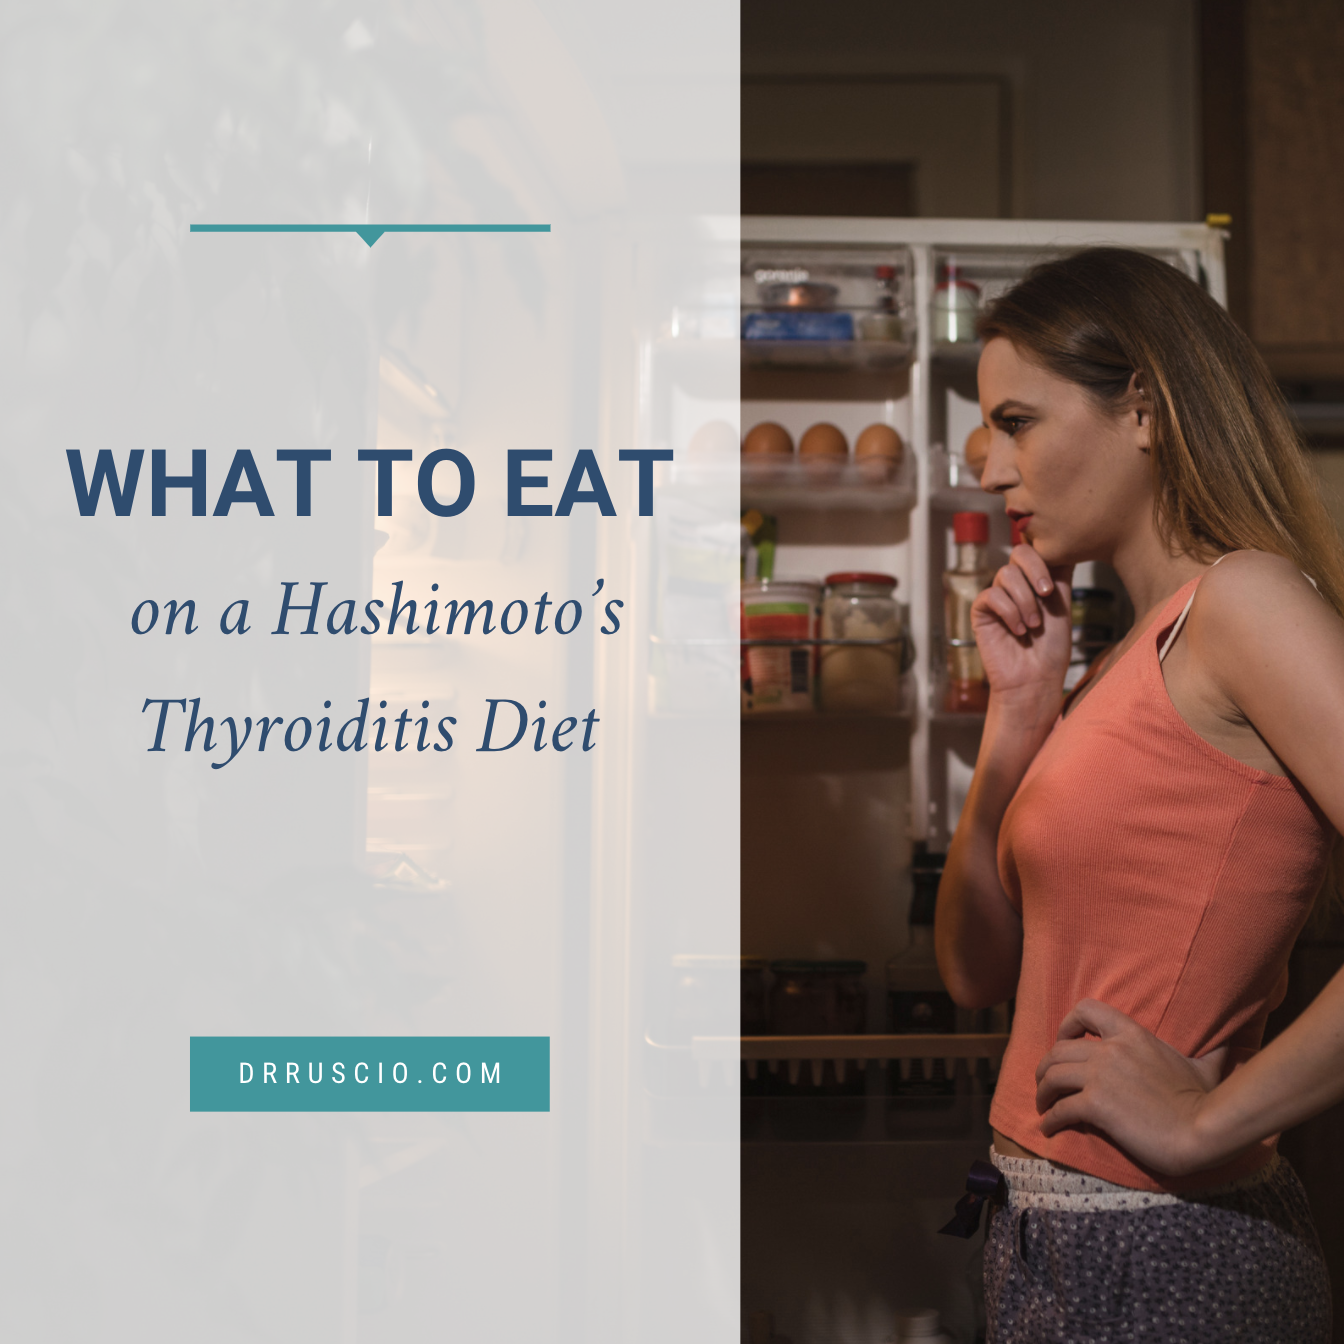 What To Eat on a Hashimoto’s Thyroiditis Diet